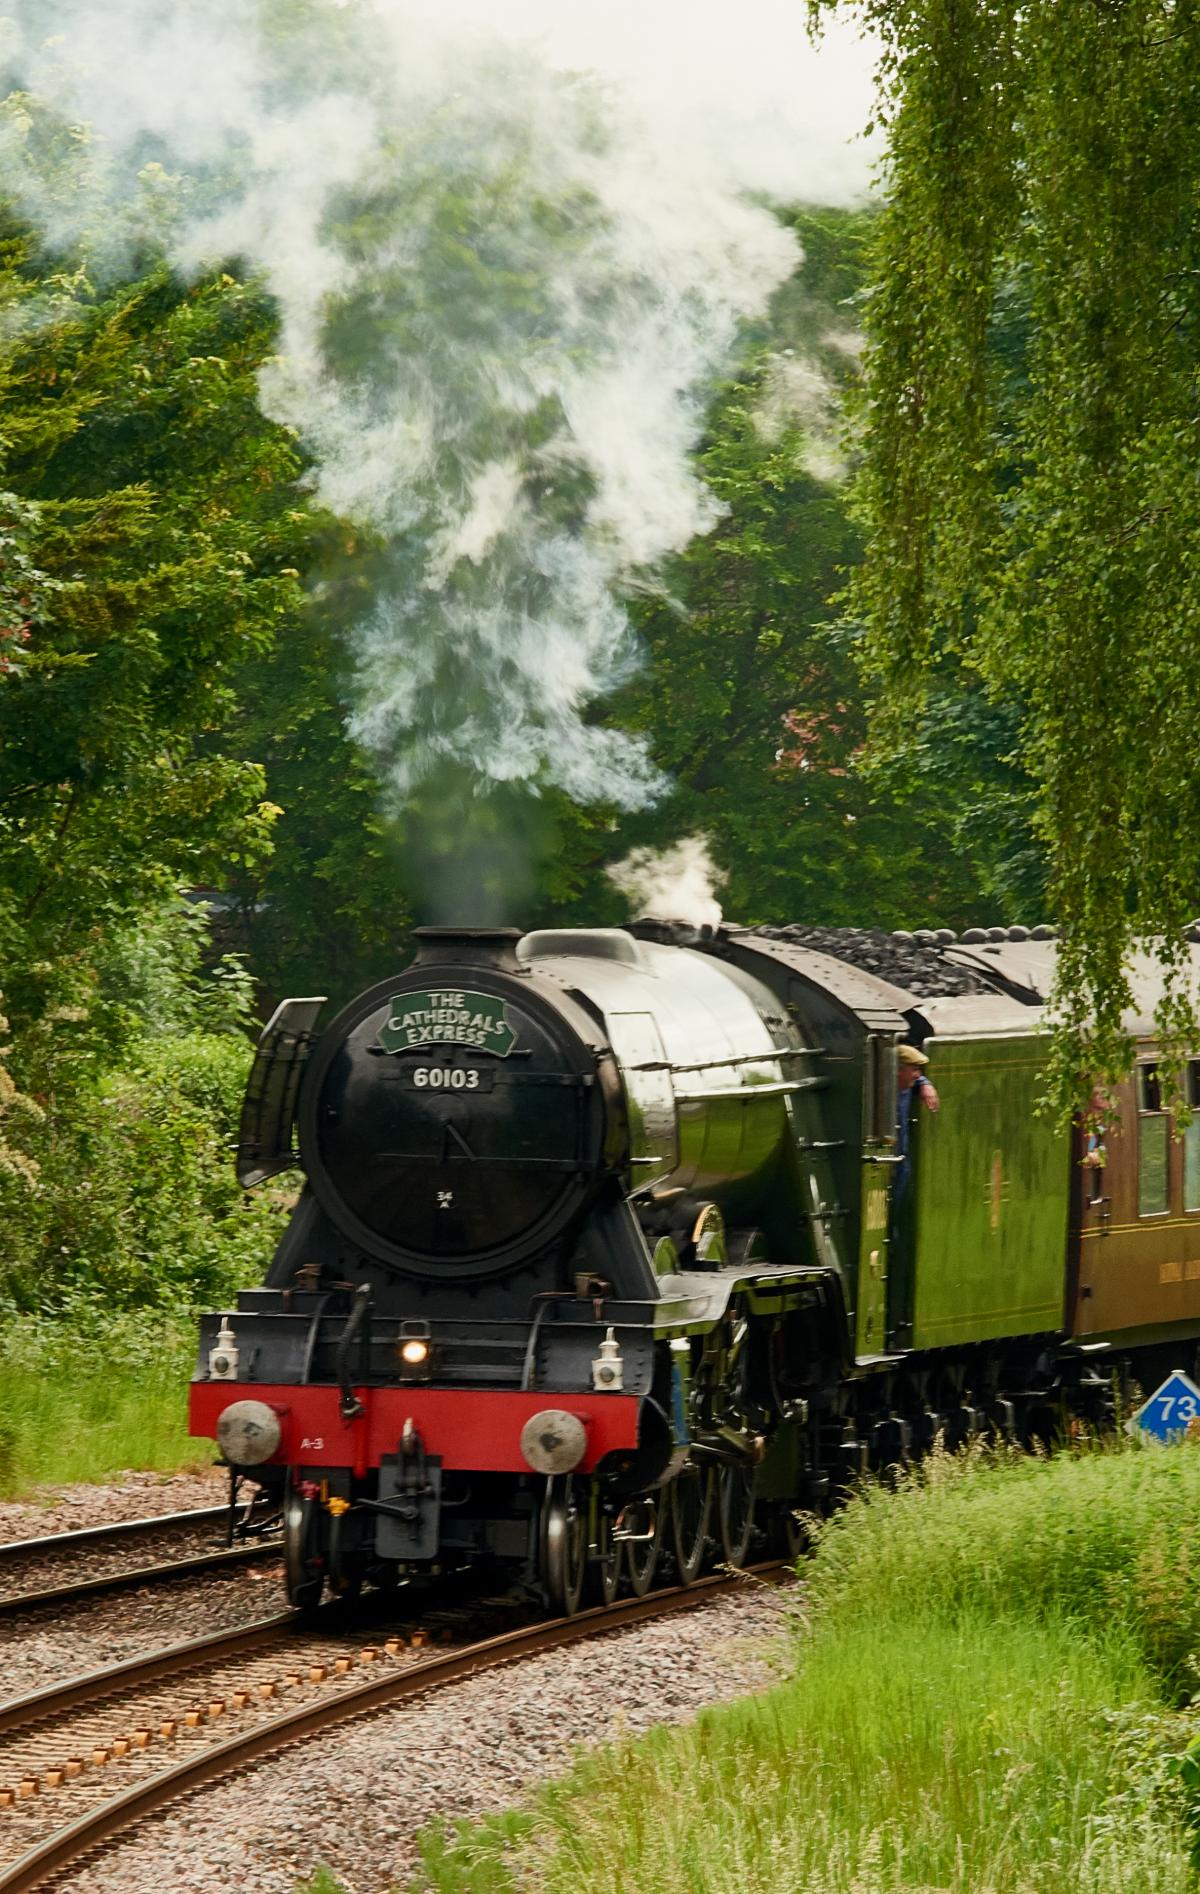 The Flying Scotsman steaming through Eastleigh. Photo by Ian Fleming.